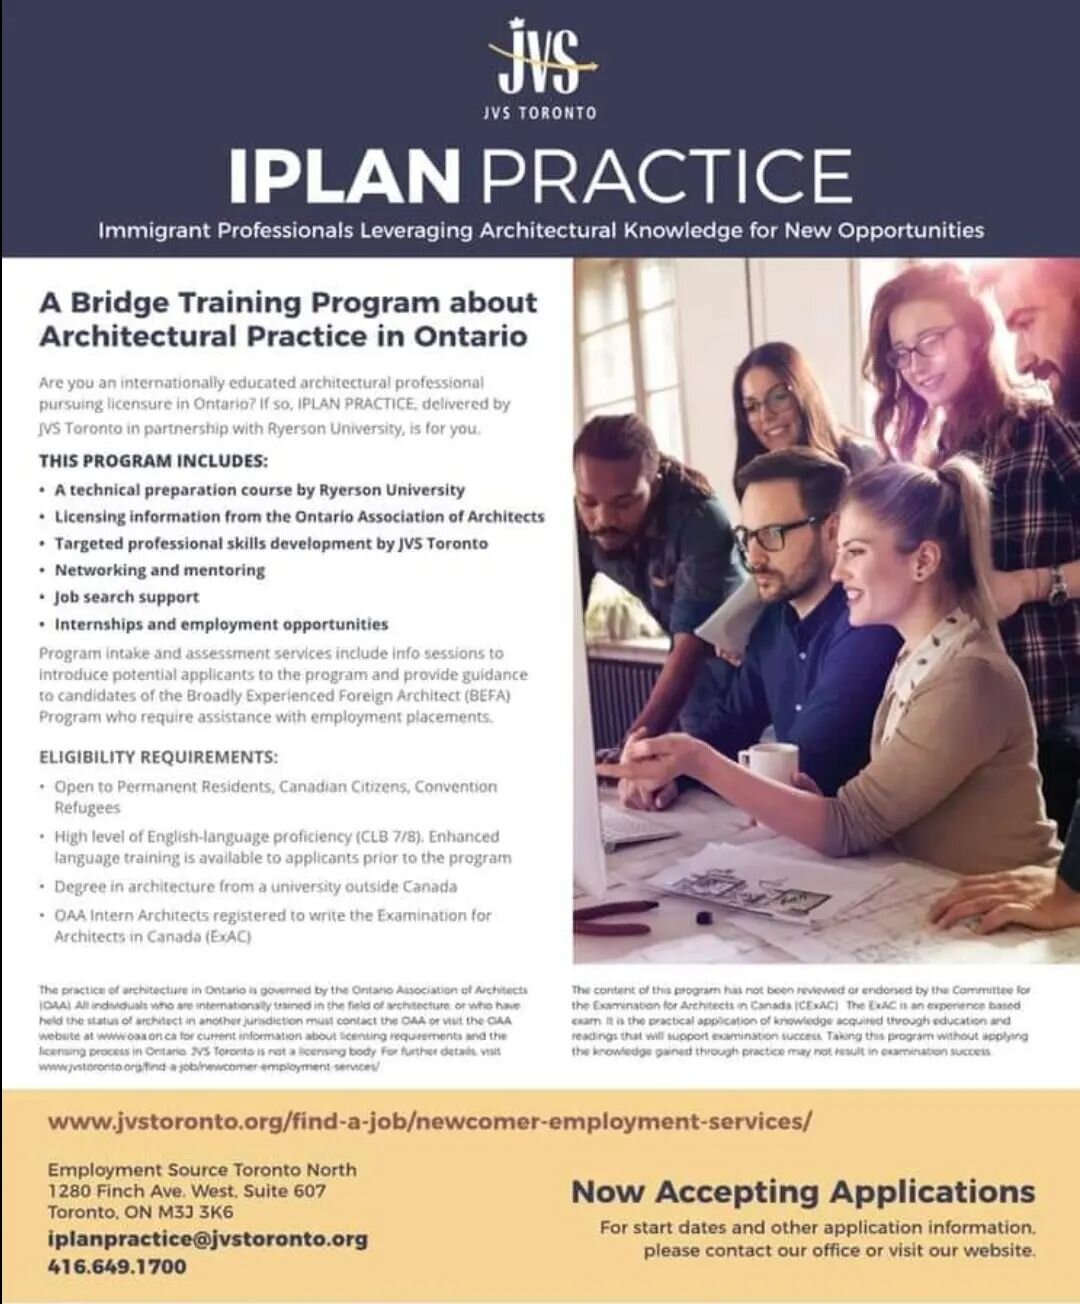 Attention Internationally Educated Architects in Ontario! Did you know about the IPLAN PRACTICE program - a free, online, 15 week bridging program designed for internationally educated architectural professionals who are OAA Interns planning to write